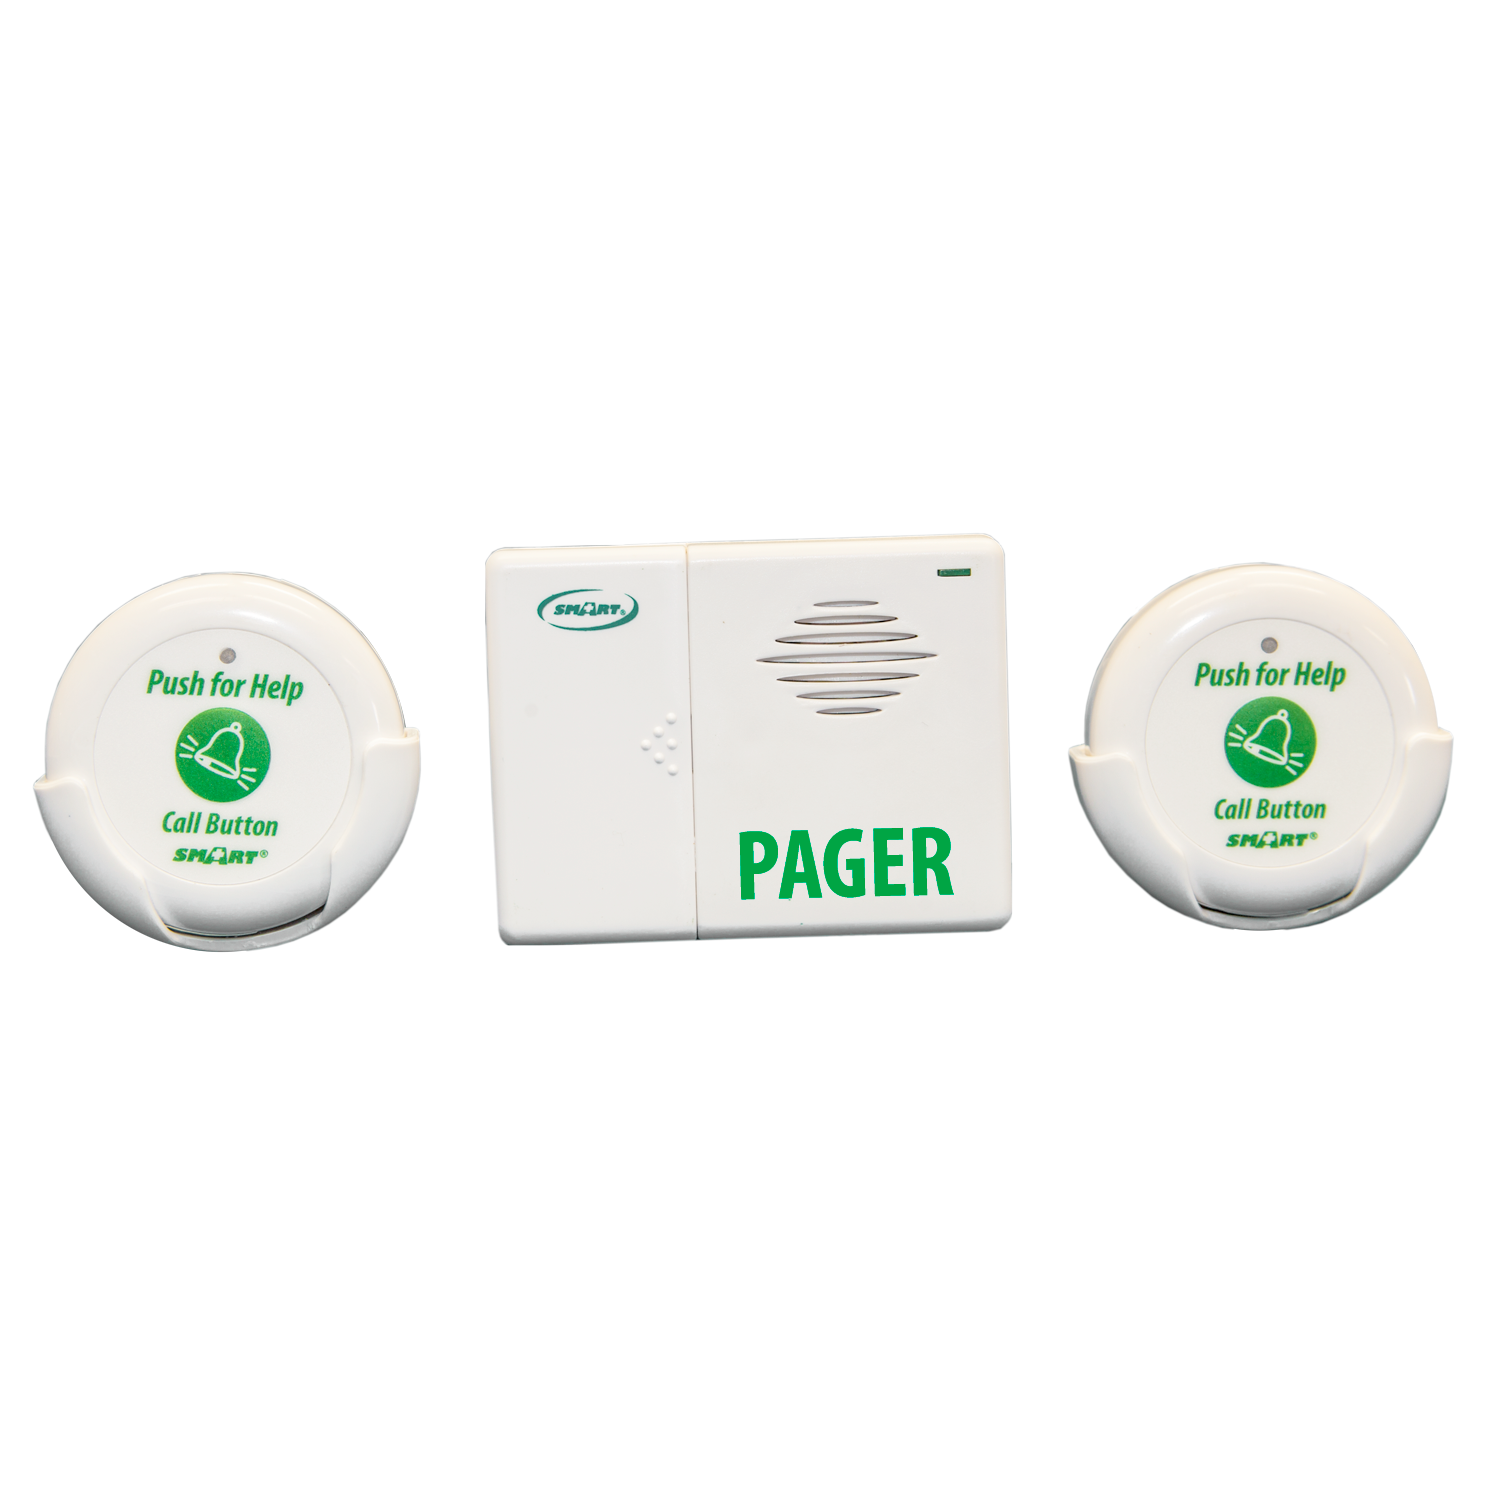 Call Buttons And Pager (Package)